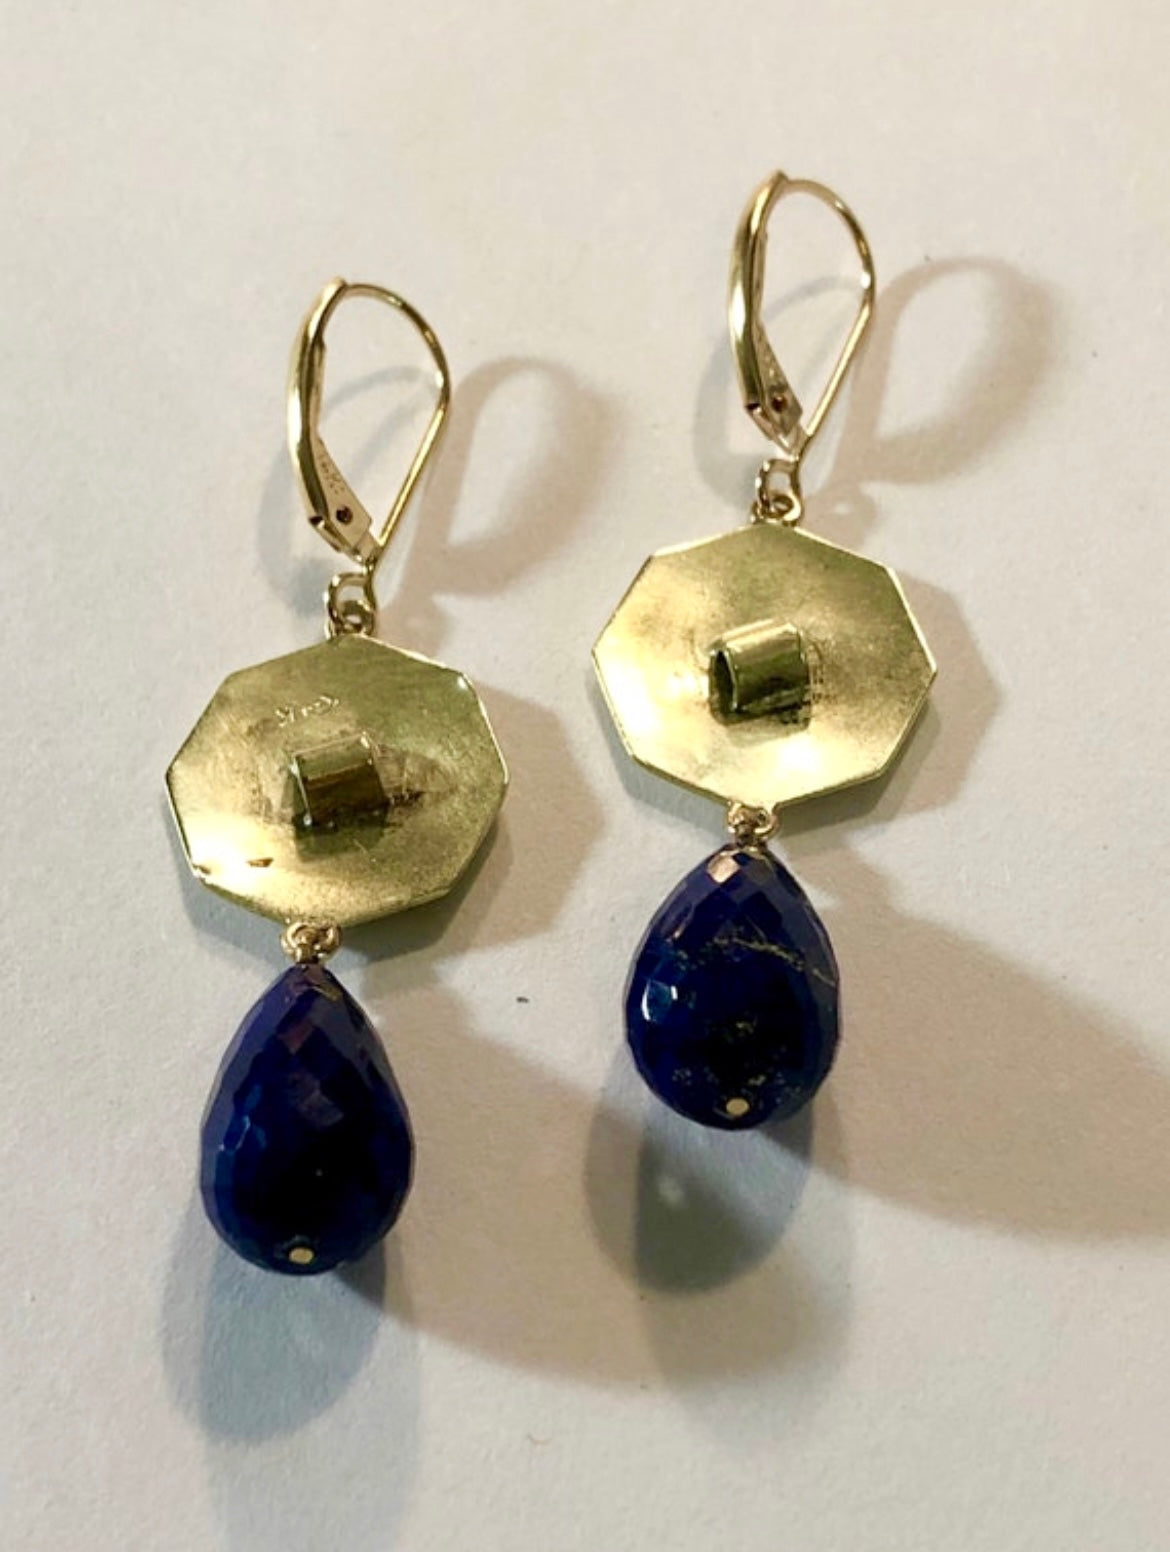 Upcycled Edwardian Cuff Link Earrings with Lapis